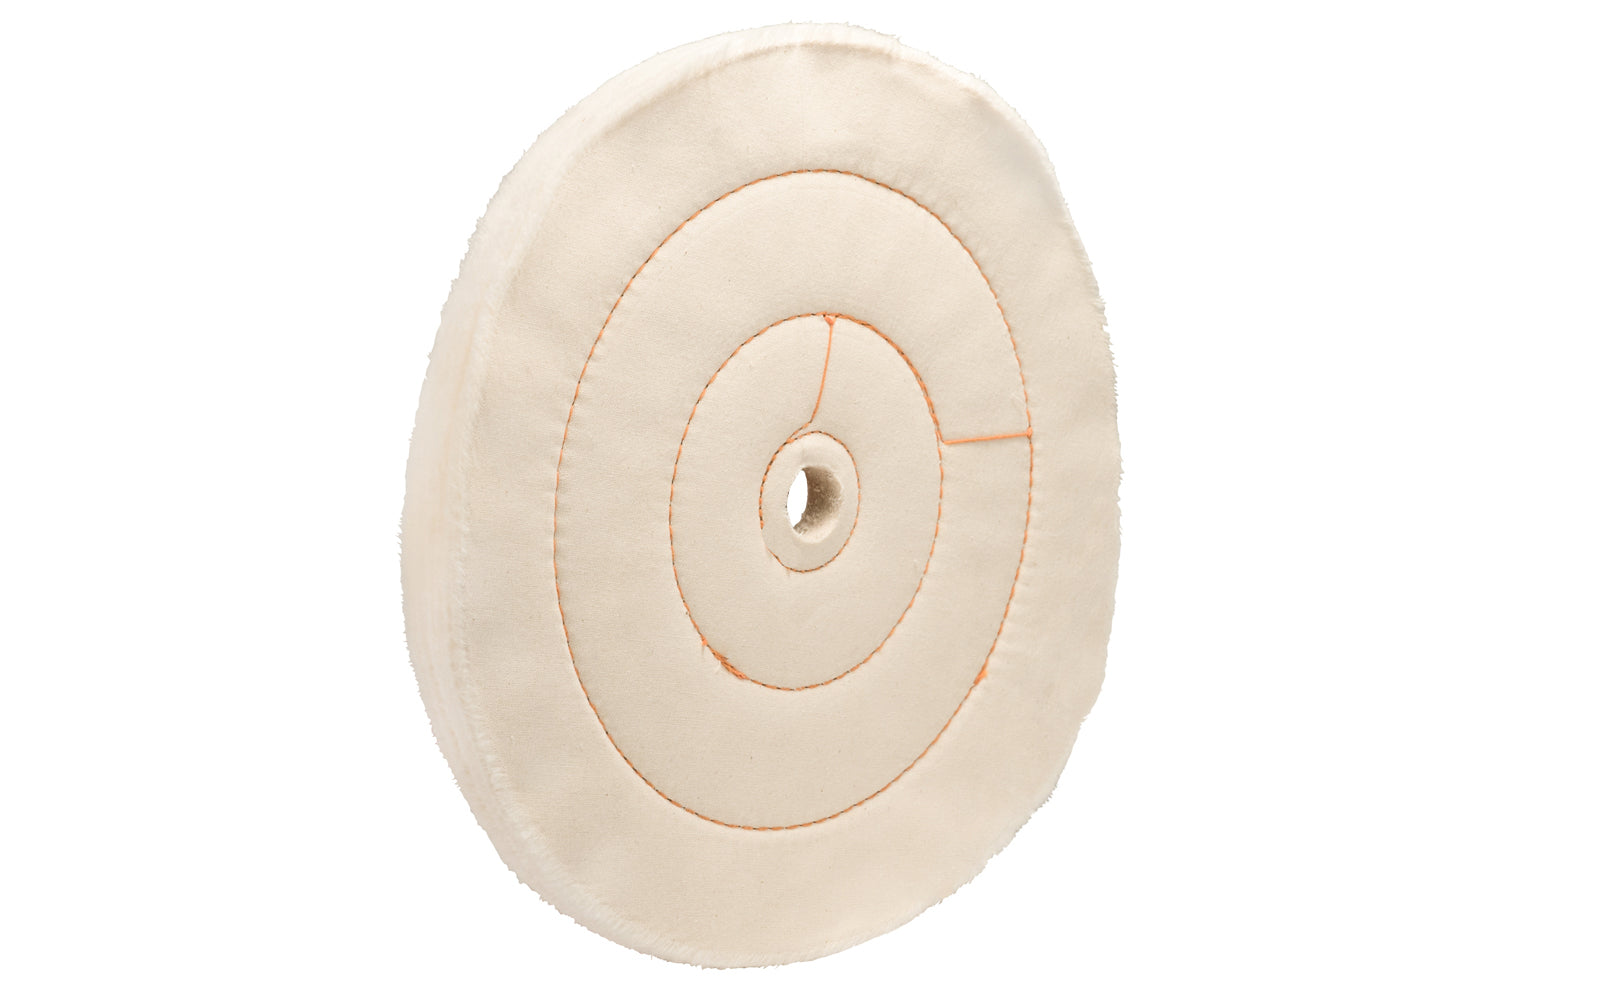 The 10" Cushion Sewn Buffing Wheel ~ 1" Thick is ideal for light cutting & coloring (polishing). 10" diameter of wheel. 3/4" hole diameter. Fine cotton sheeting - Held together with three circles of lockstitch sewing. Made in USA. Dico Polishing Divine Brothers. Model 525-72-10